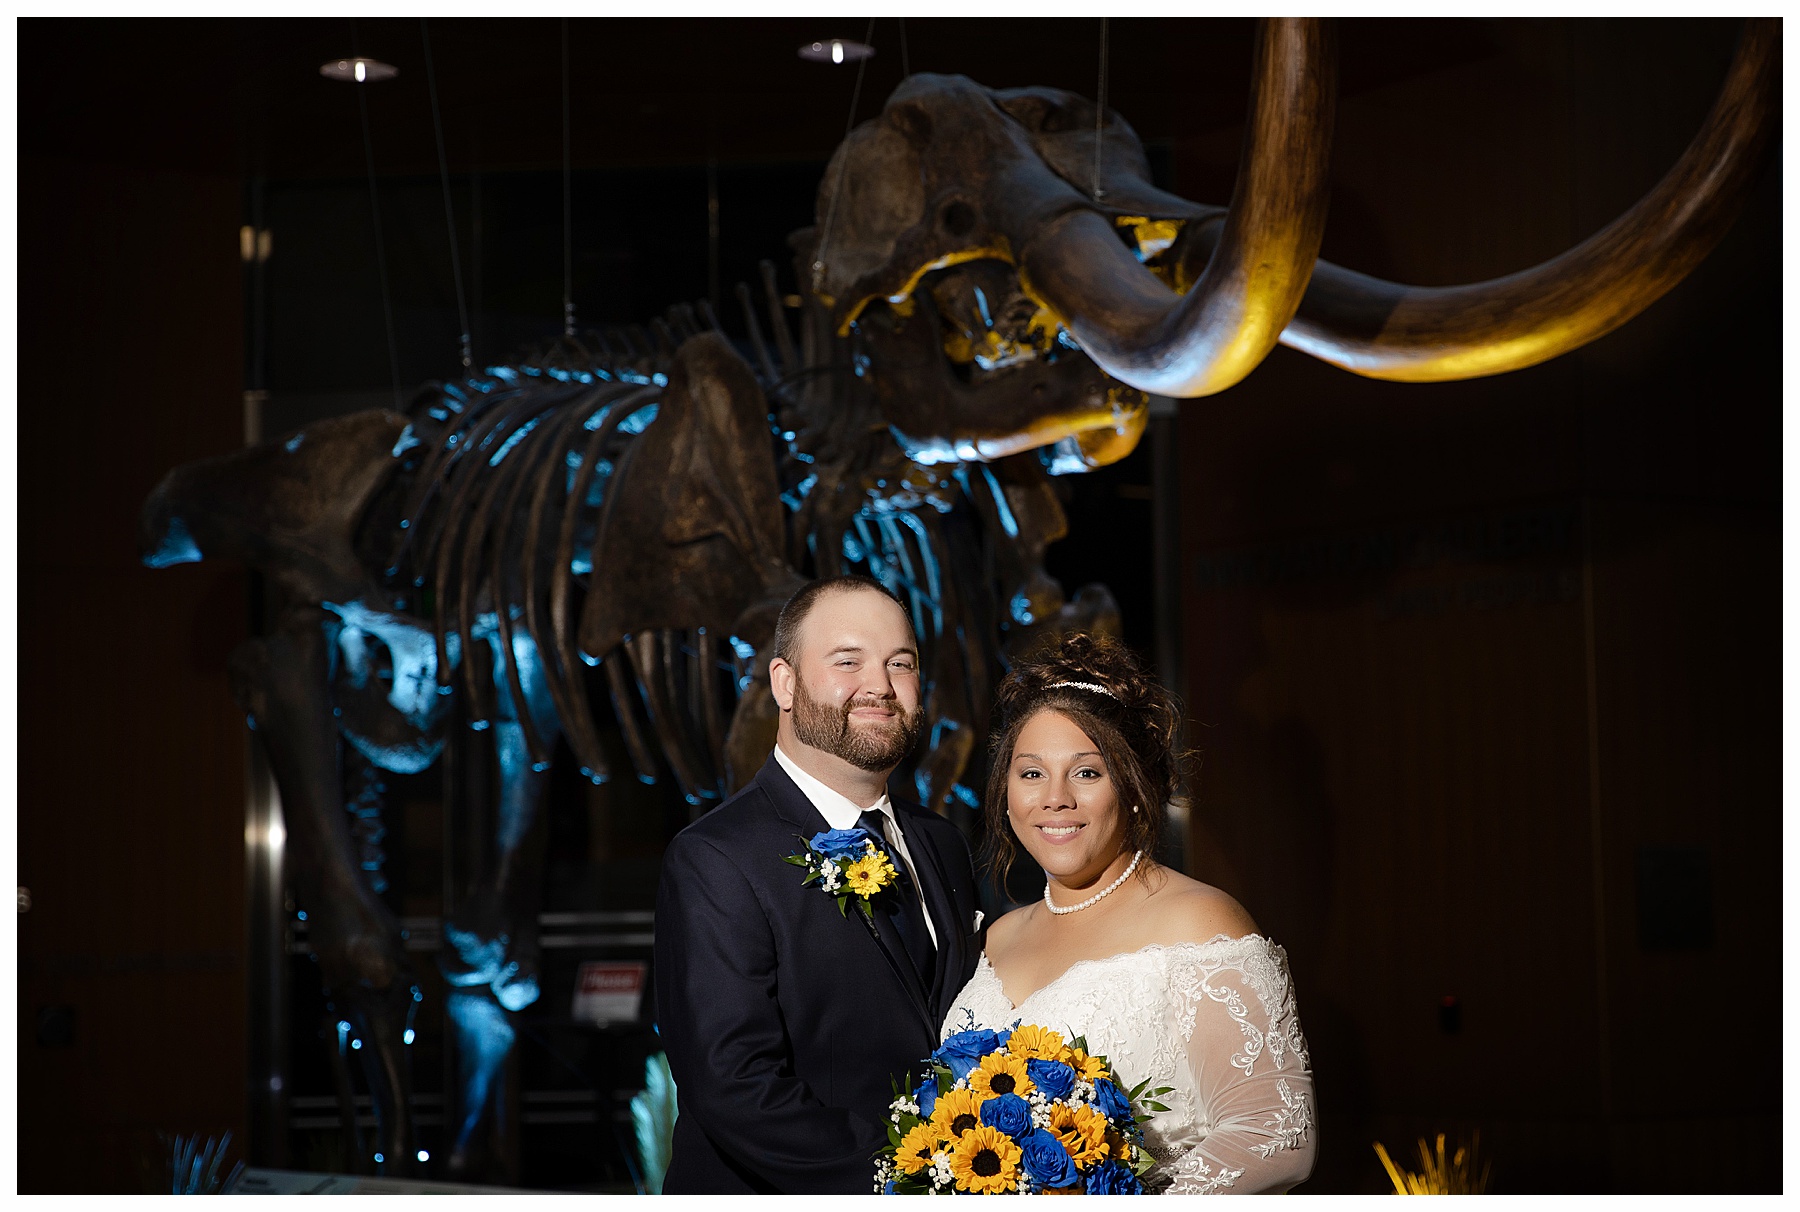 Bride and Groom with Mammoth lit in background at the Bismarck Heritage center Museum
